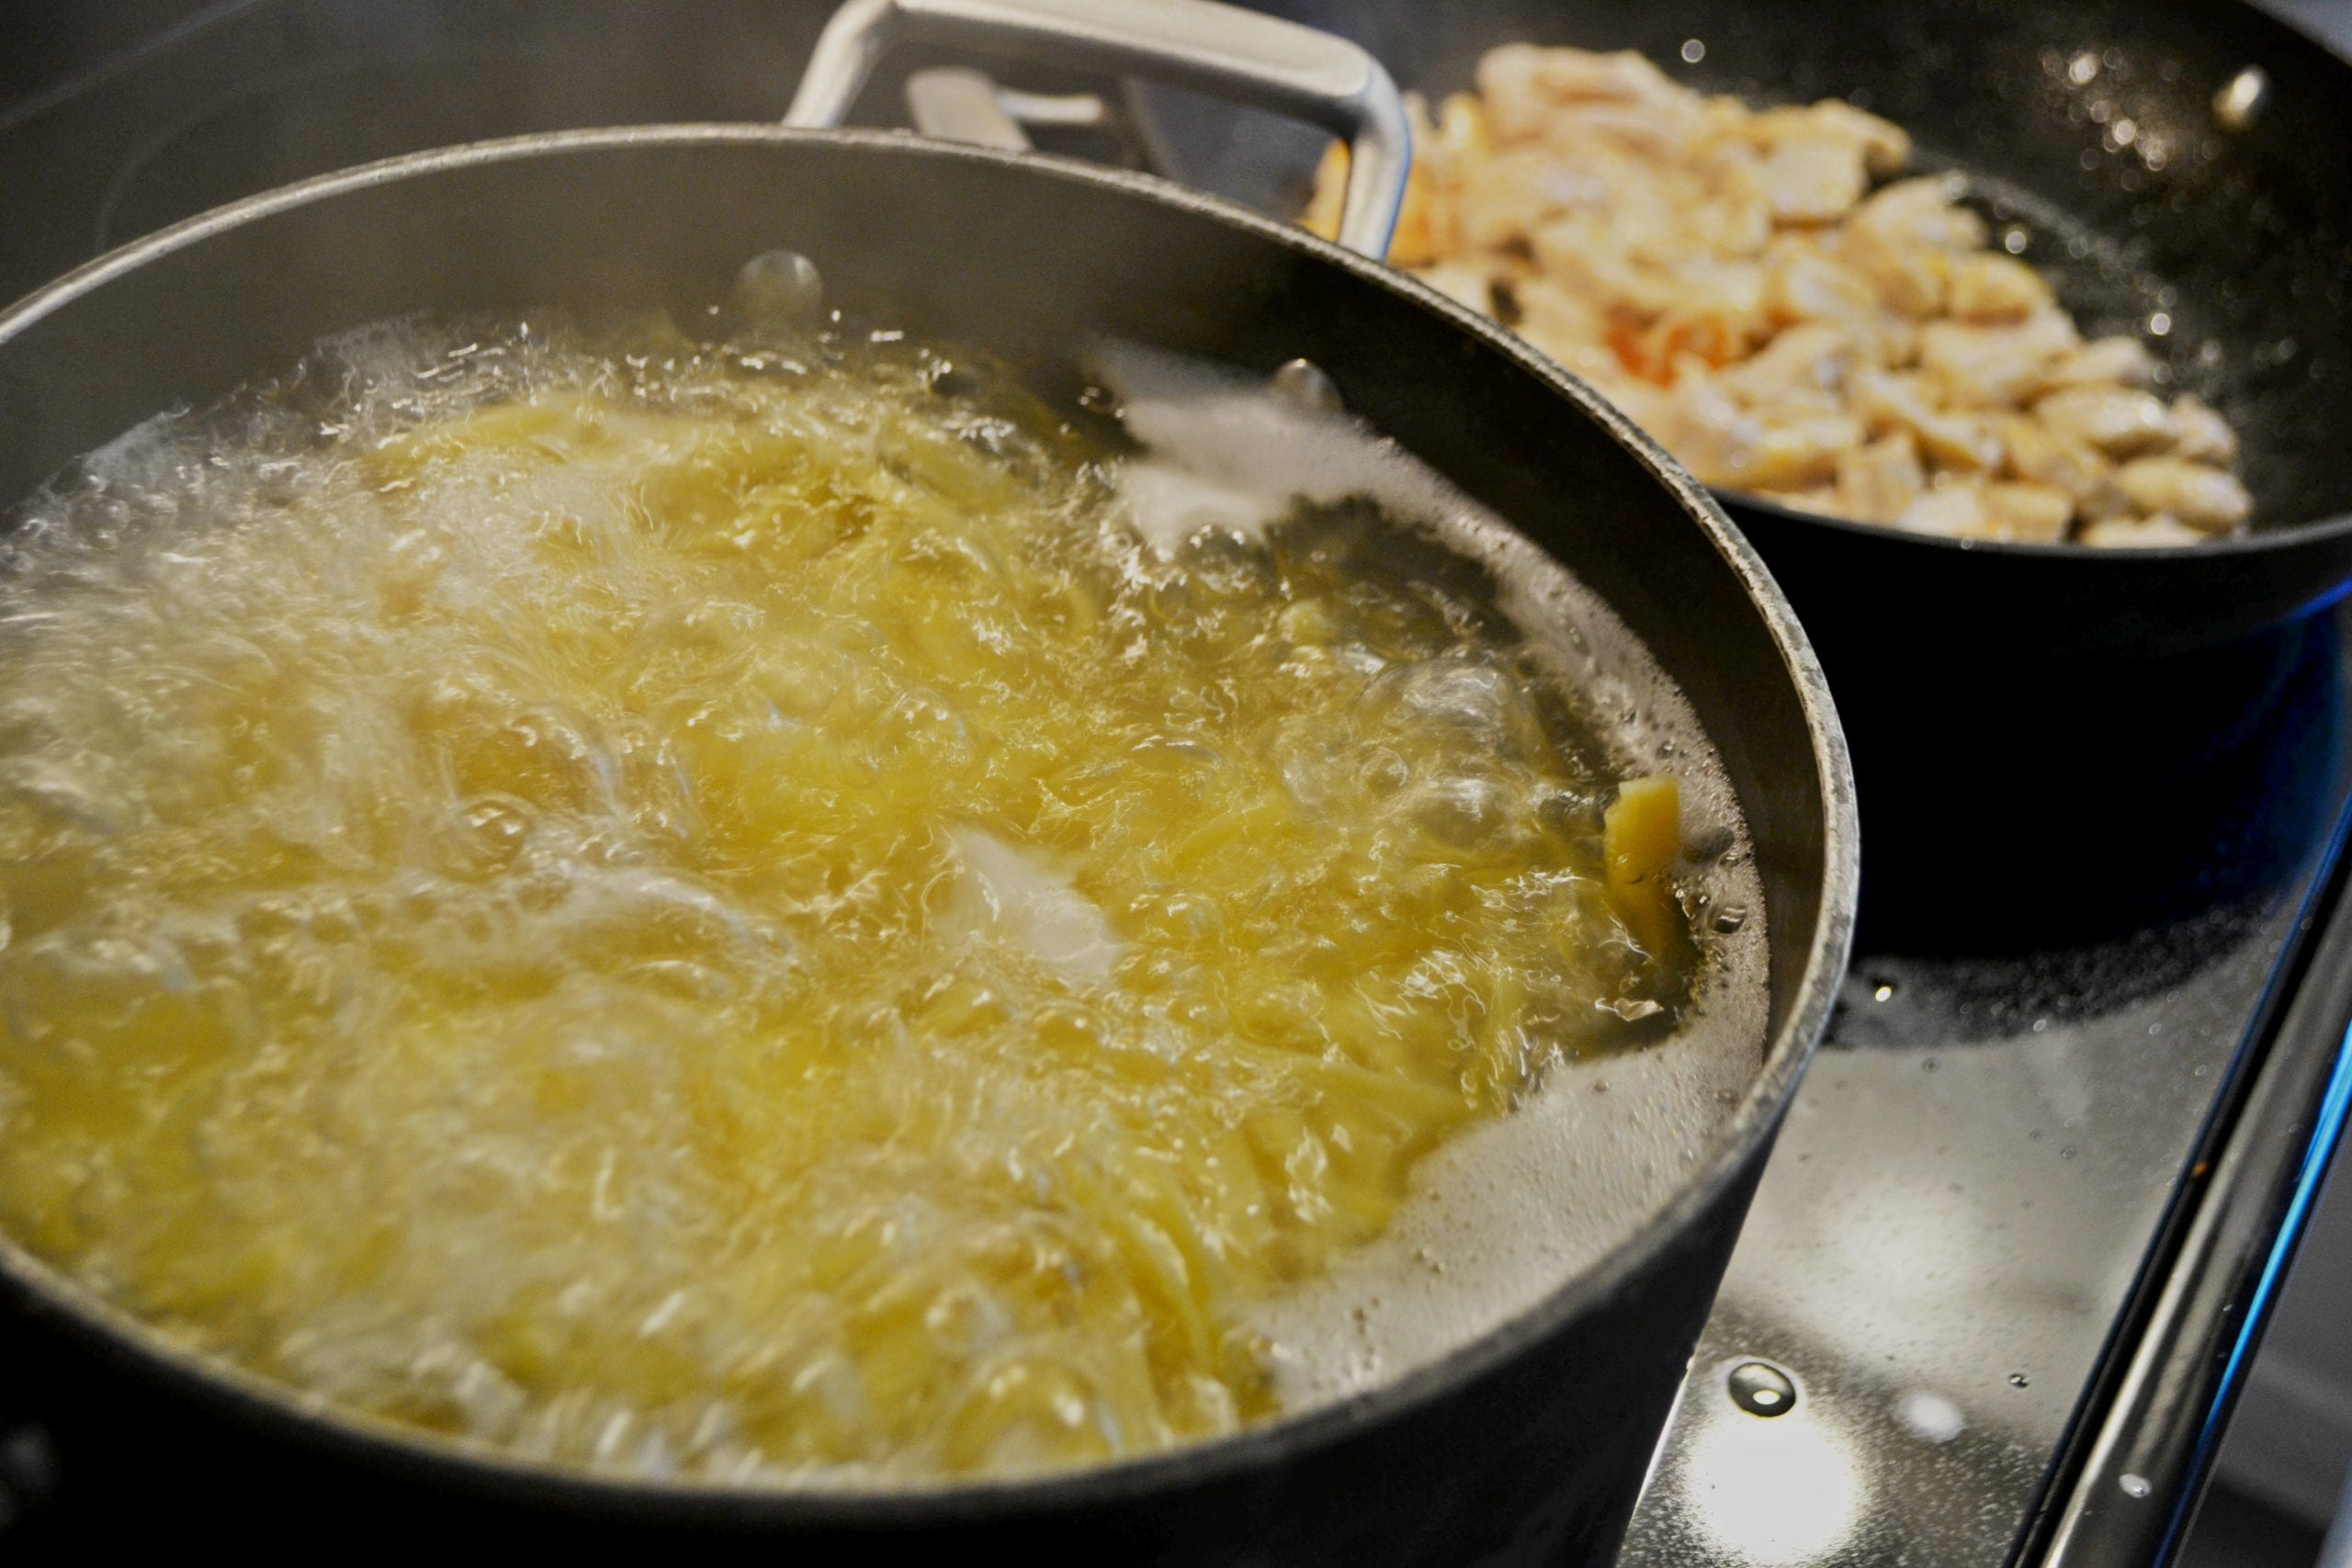 A pot of pasta boiling on a stove.